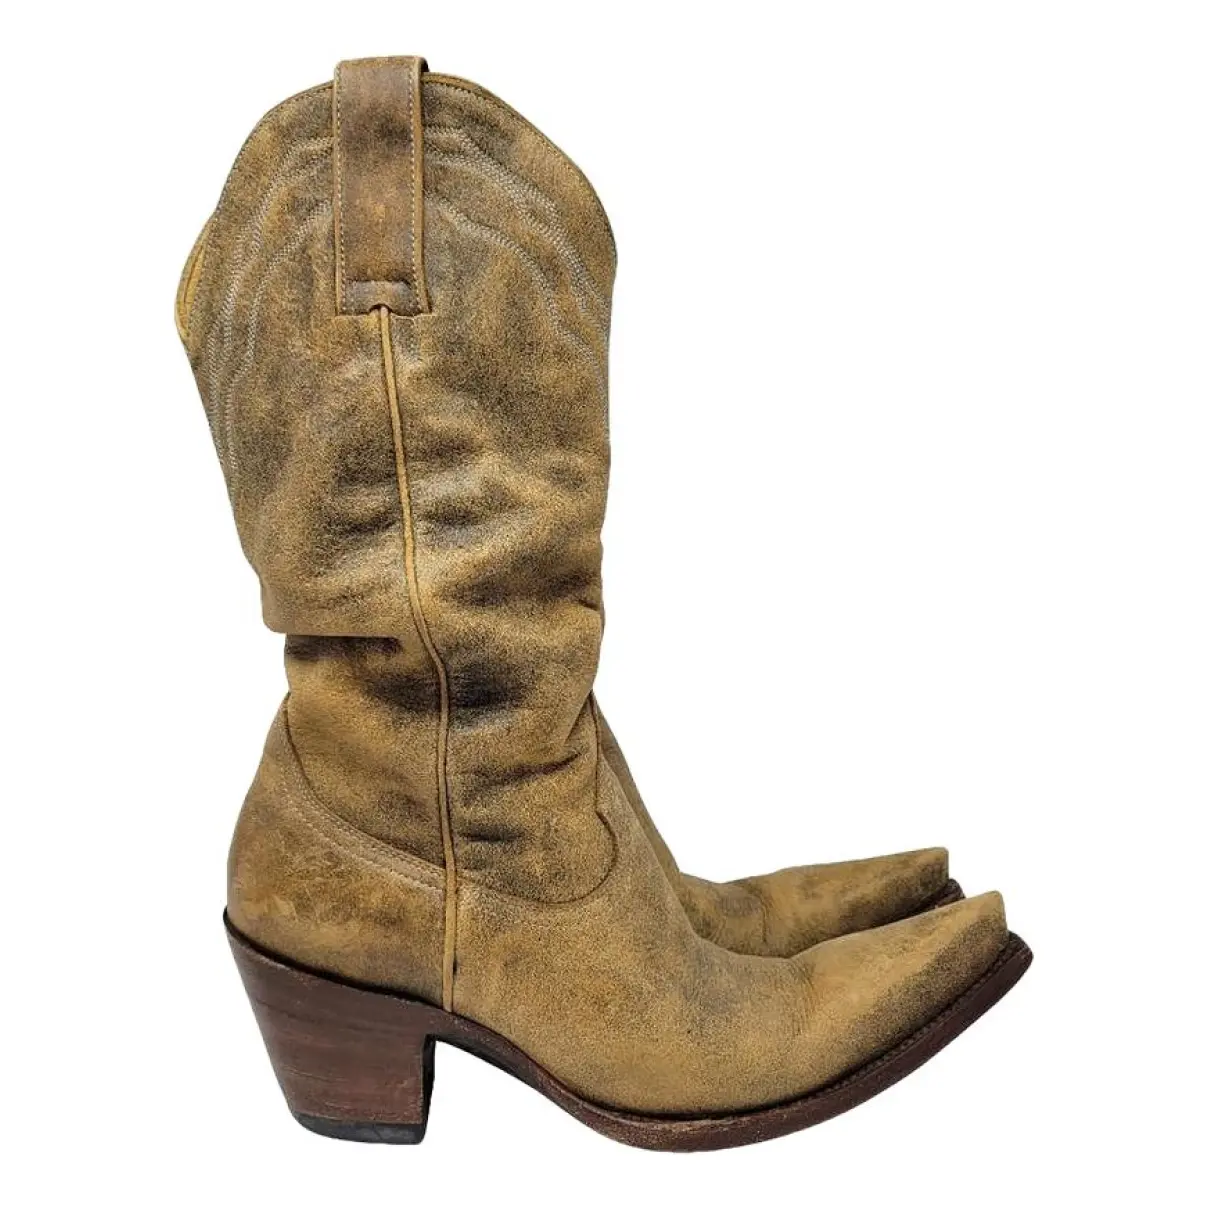 Leather western boots